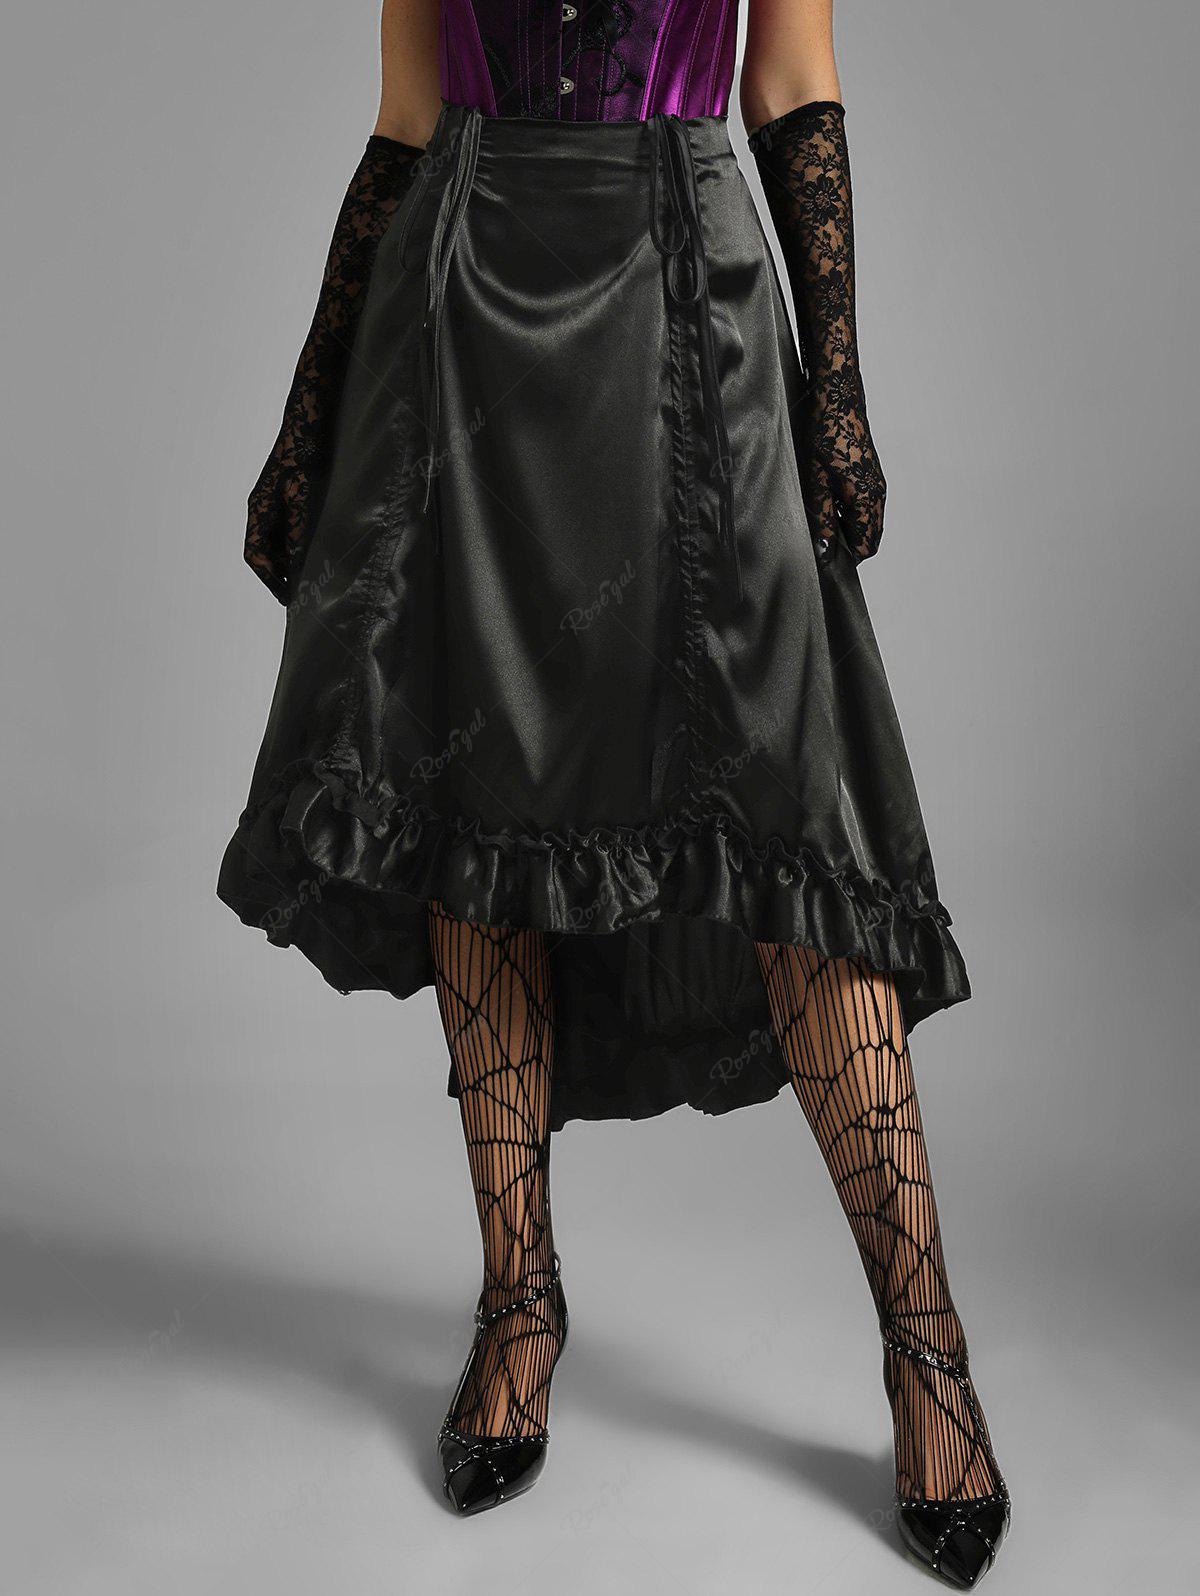 💗Vixtina Loves💗 Gothic Cinched Ruched Ruffles Silky Satin Victorian High-Low Skirt